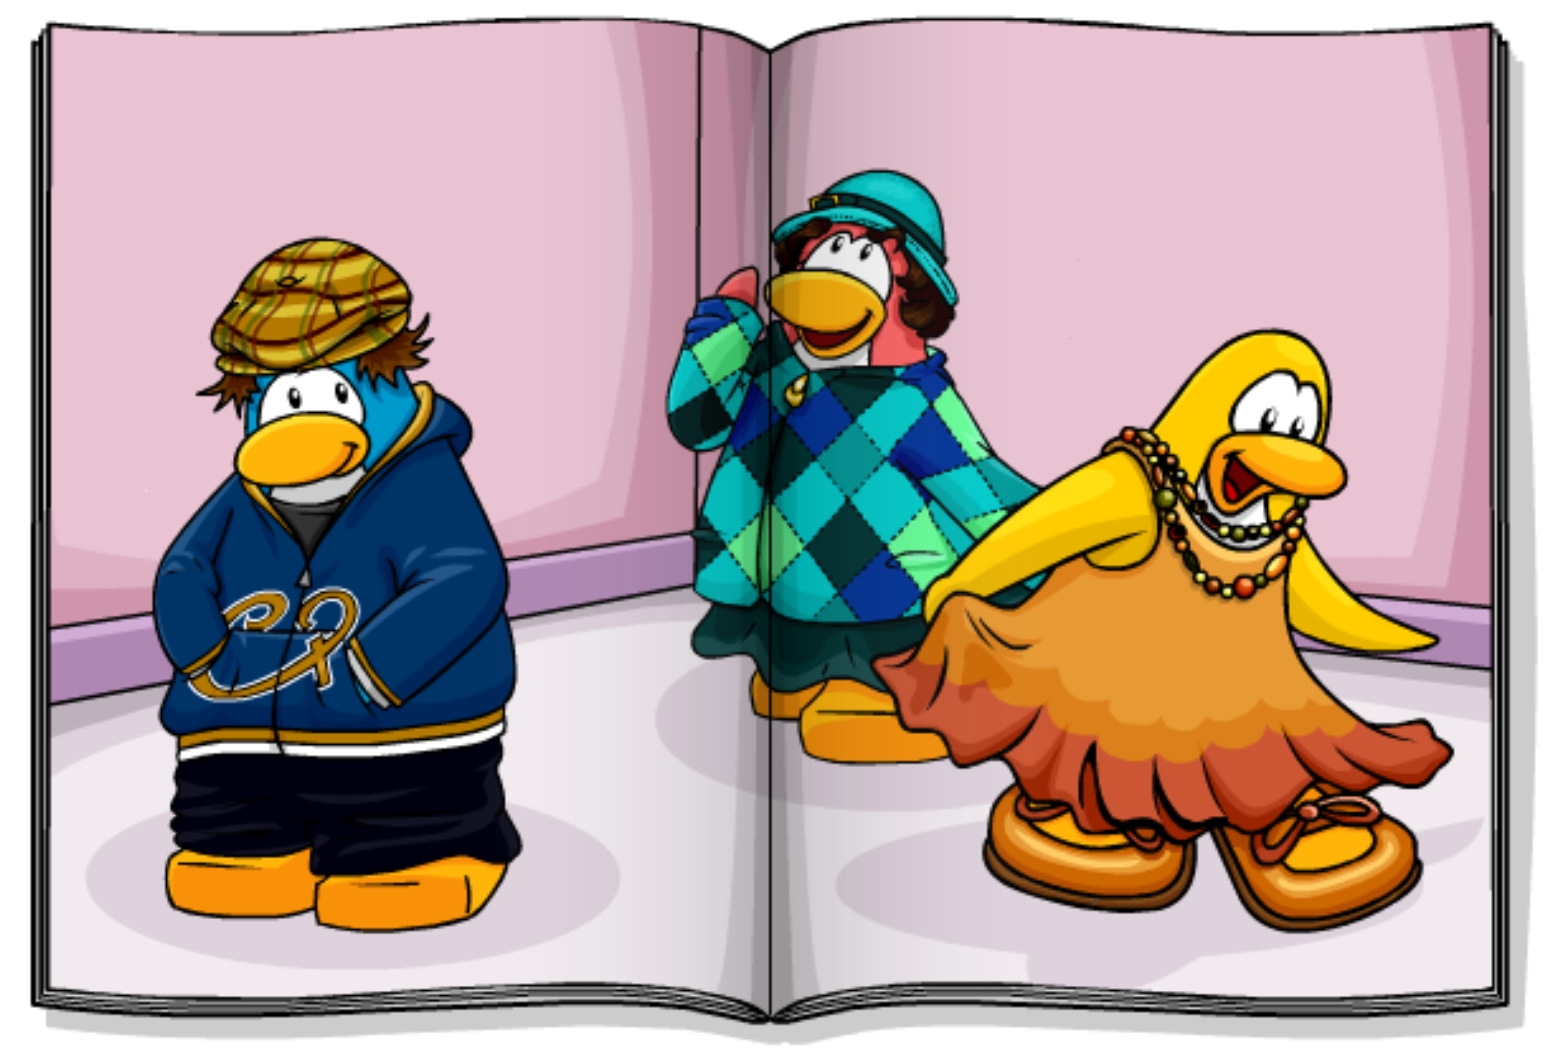 Club Penguin Rewritten Reaches 10 Million Players! (Code and More News!)